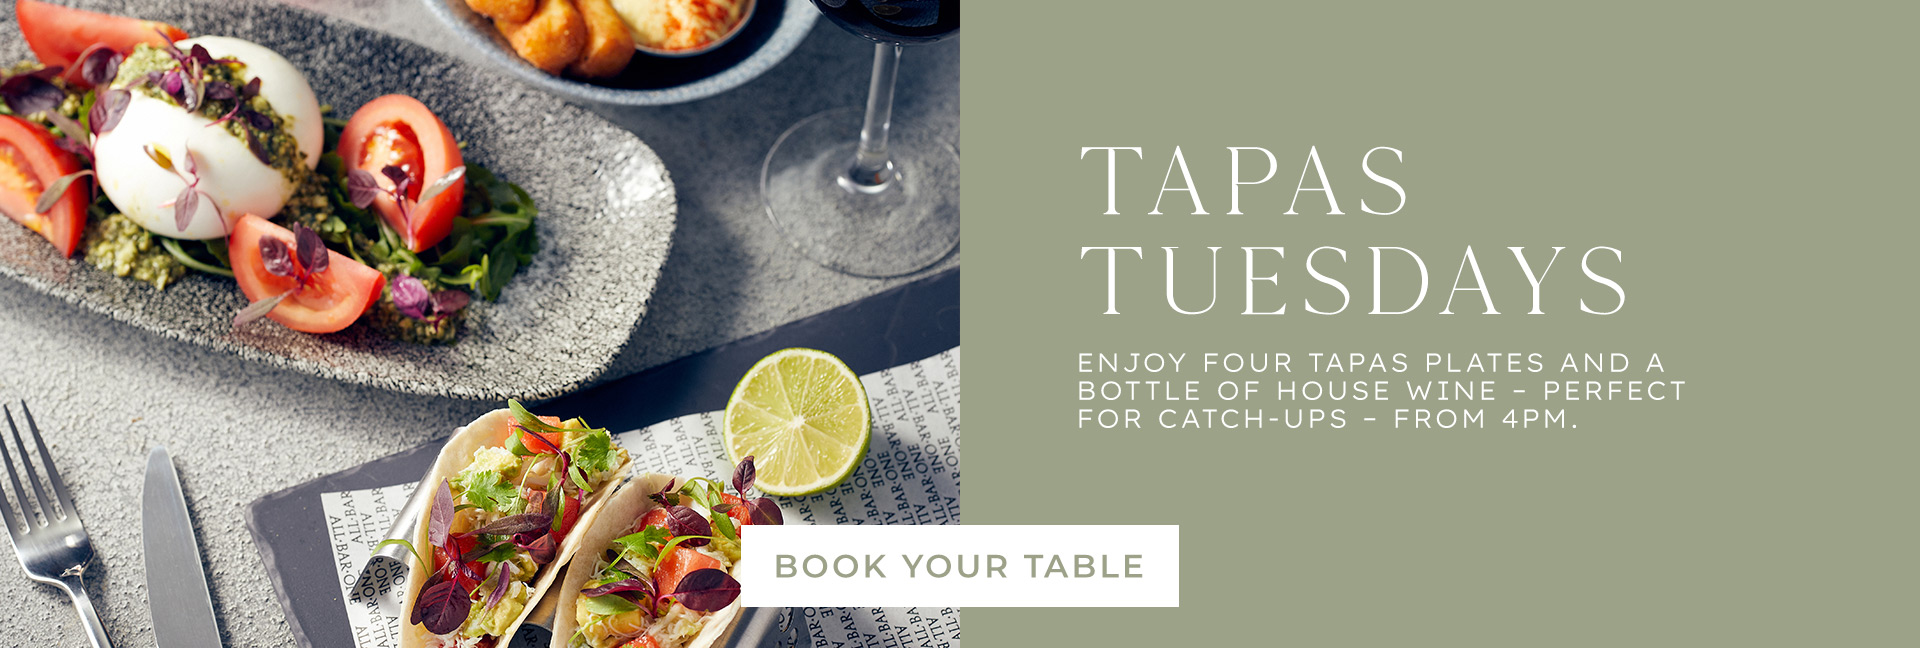 Tapas Tuesday at All Bar One Sheffield - Book now